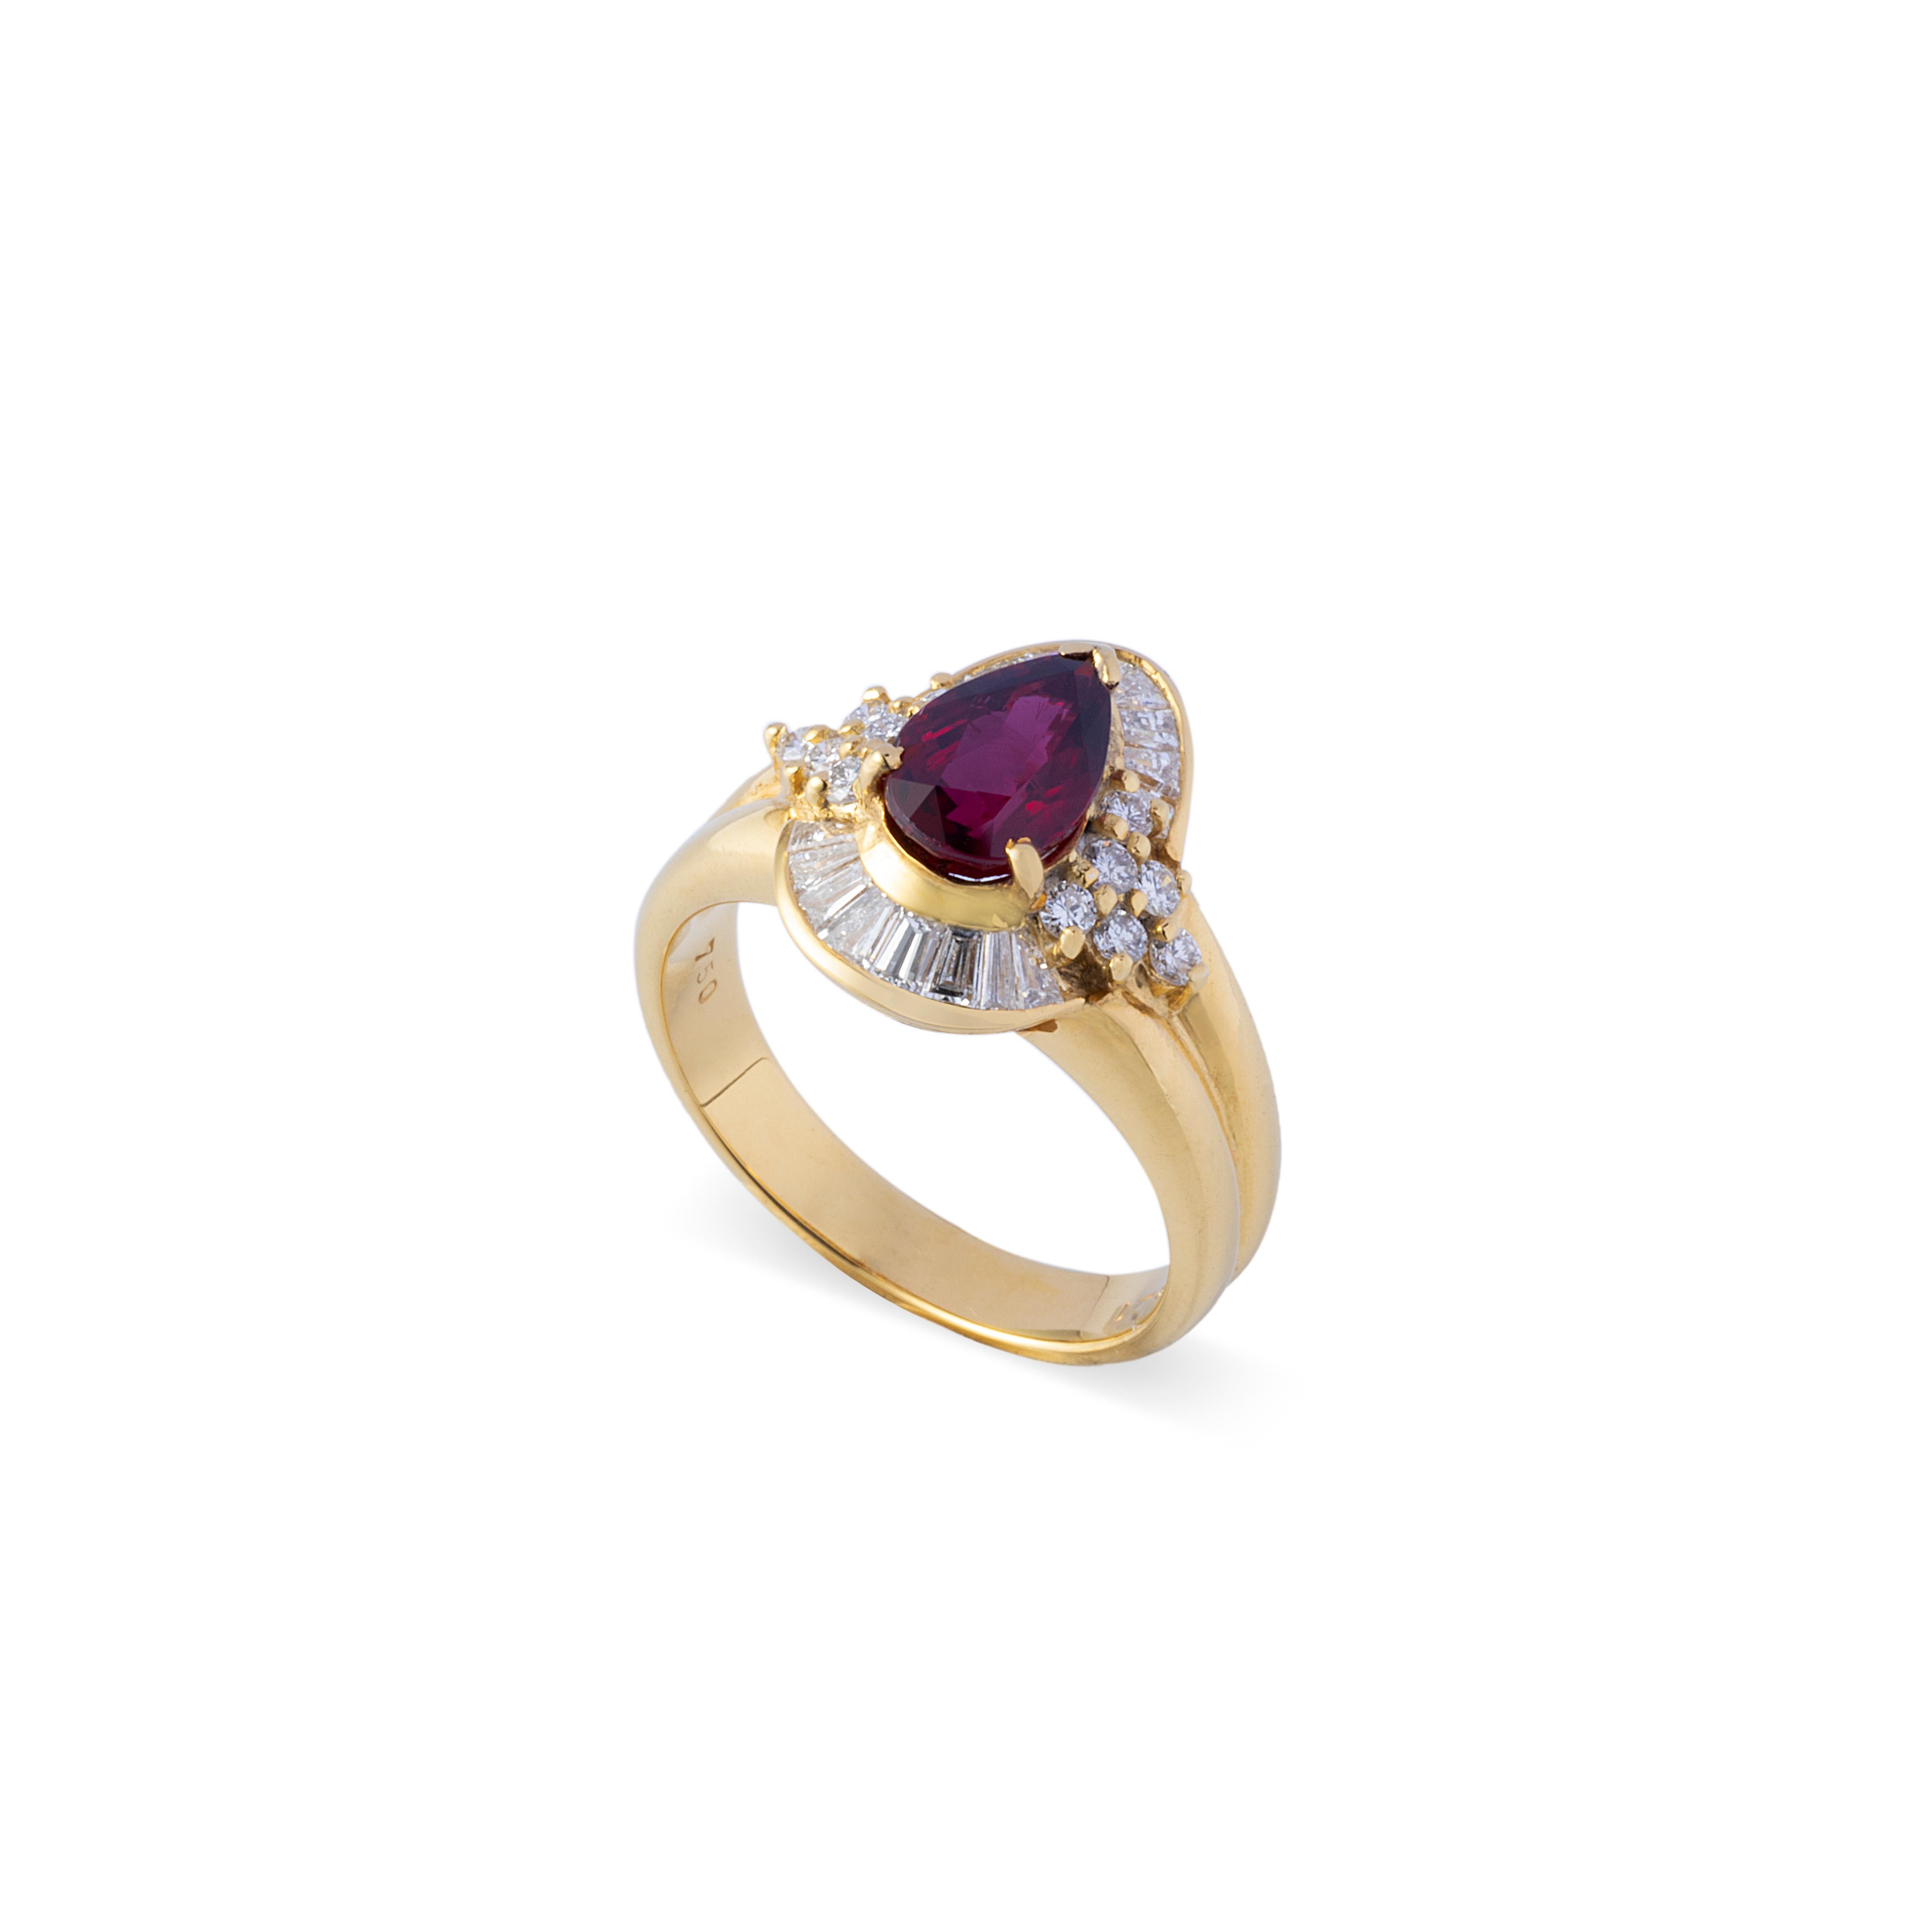 This amazing one-of-a-kind vintage cocktail ring boasts a pear cut ruby of 1.54 carats accompanied by GIA certificate. The stunning pear cut ruby is heavily surrounded by high grade natural tapered baguette and brilliant cut diamonds. Immaculate